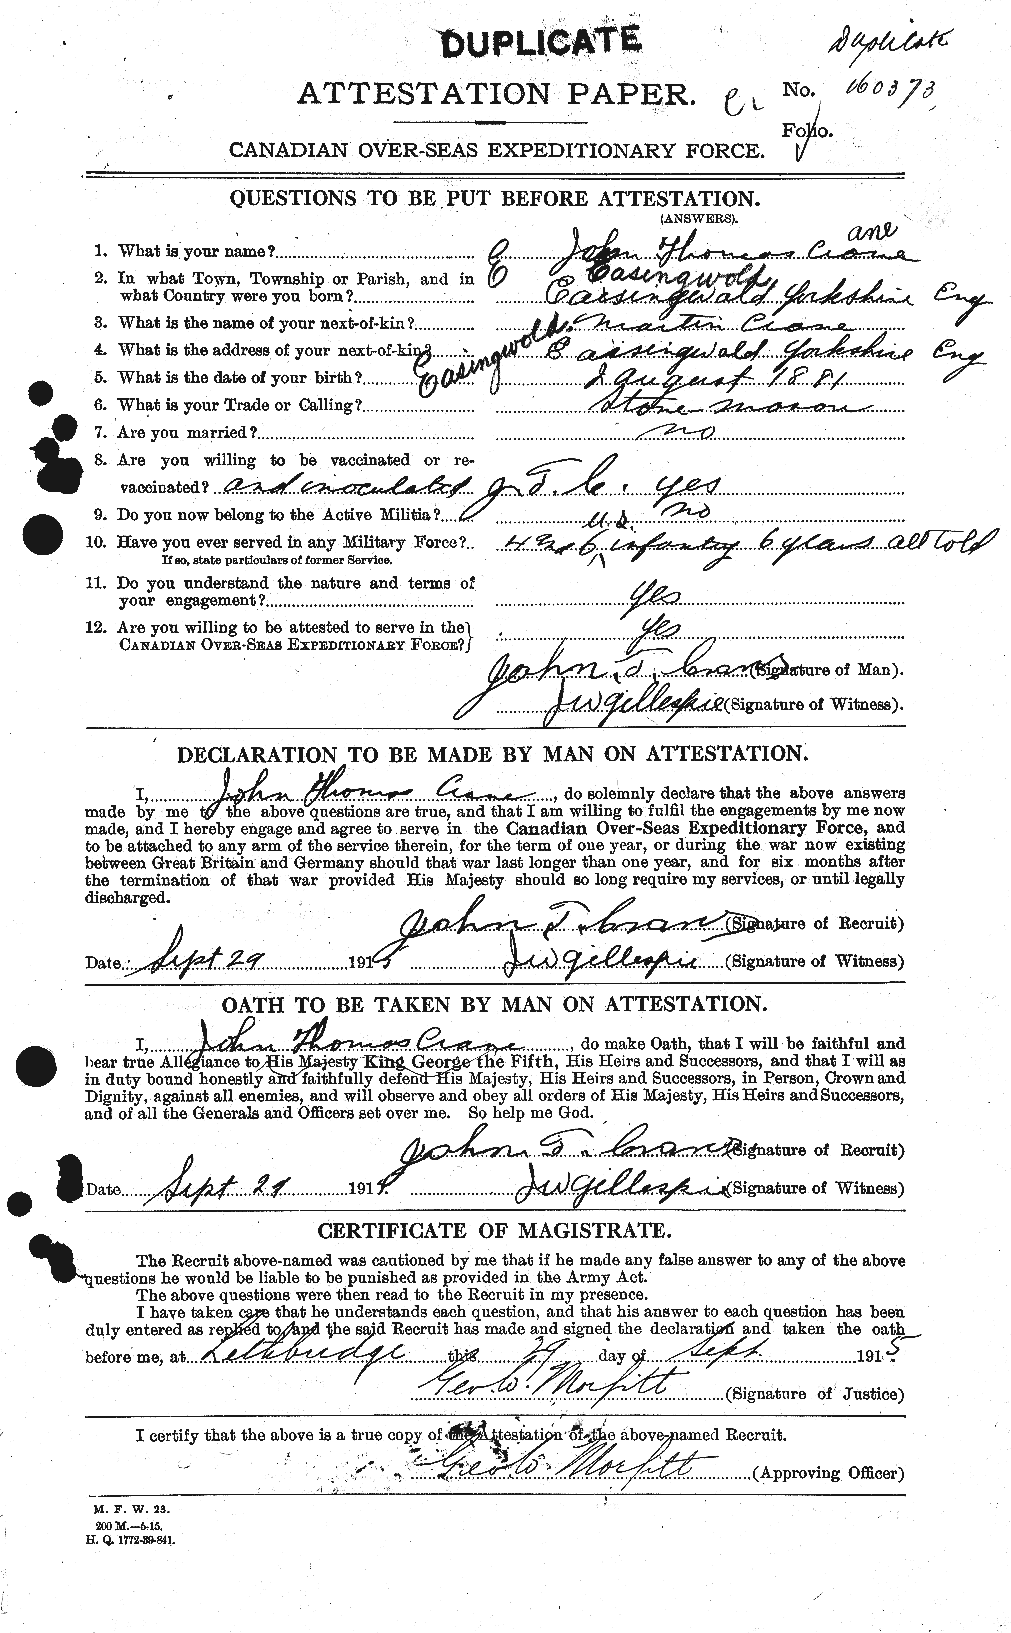 Personnel Records of the First World War - CEF 061767a